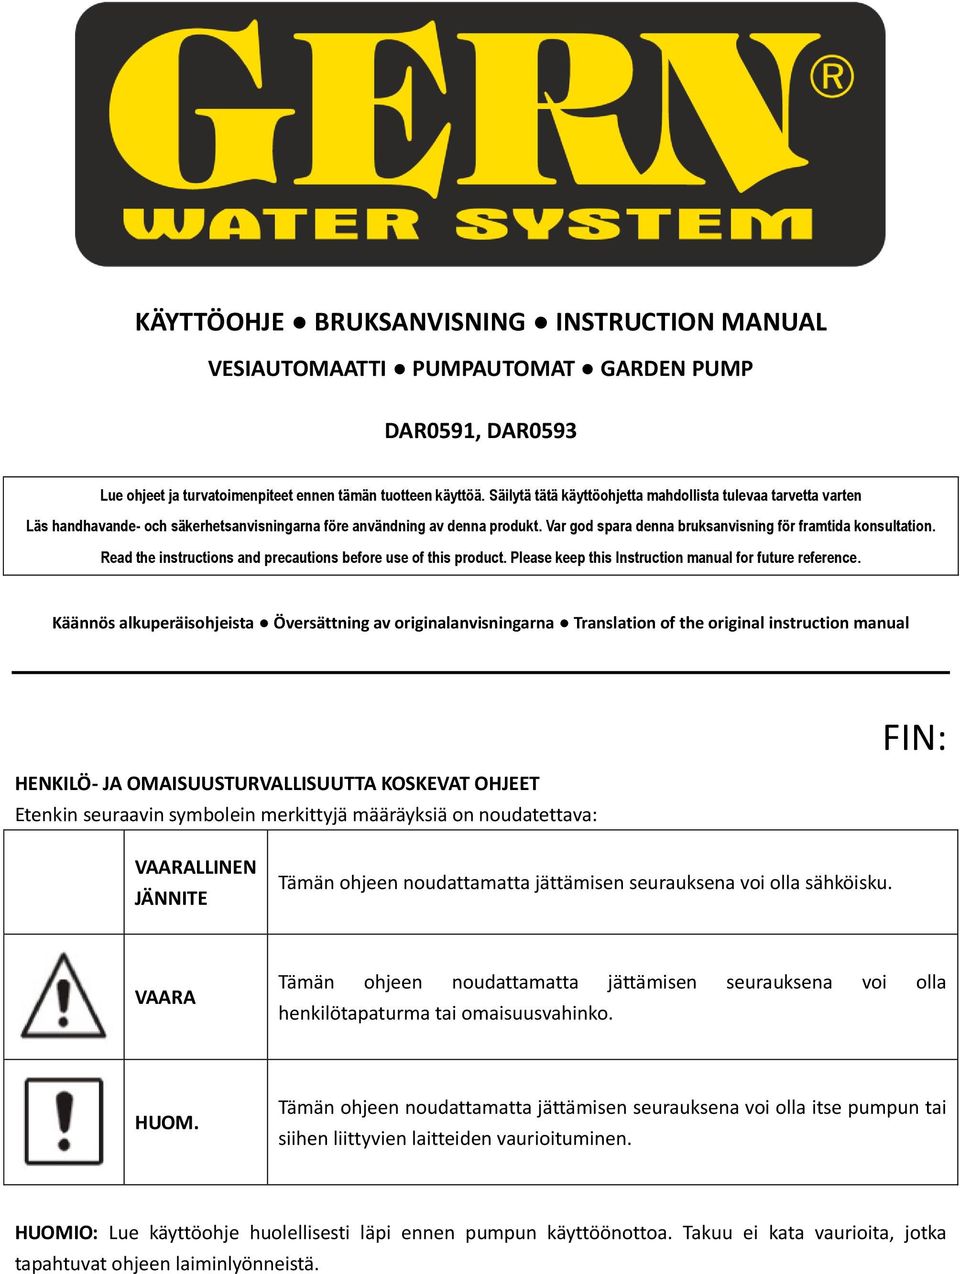 Var god spara denna bruksanvisning för framtida konsultation. Read the instructions and precautions before use of this product. Please keep this Instruction manual for future reference.